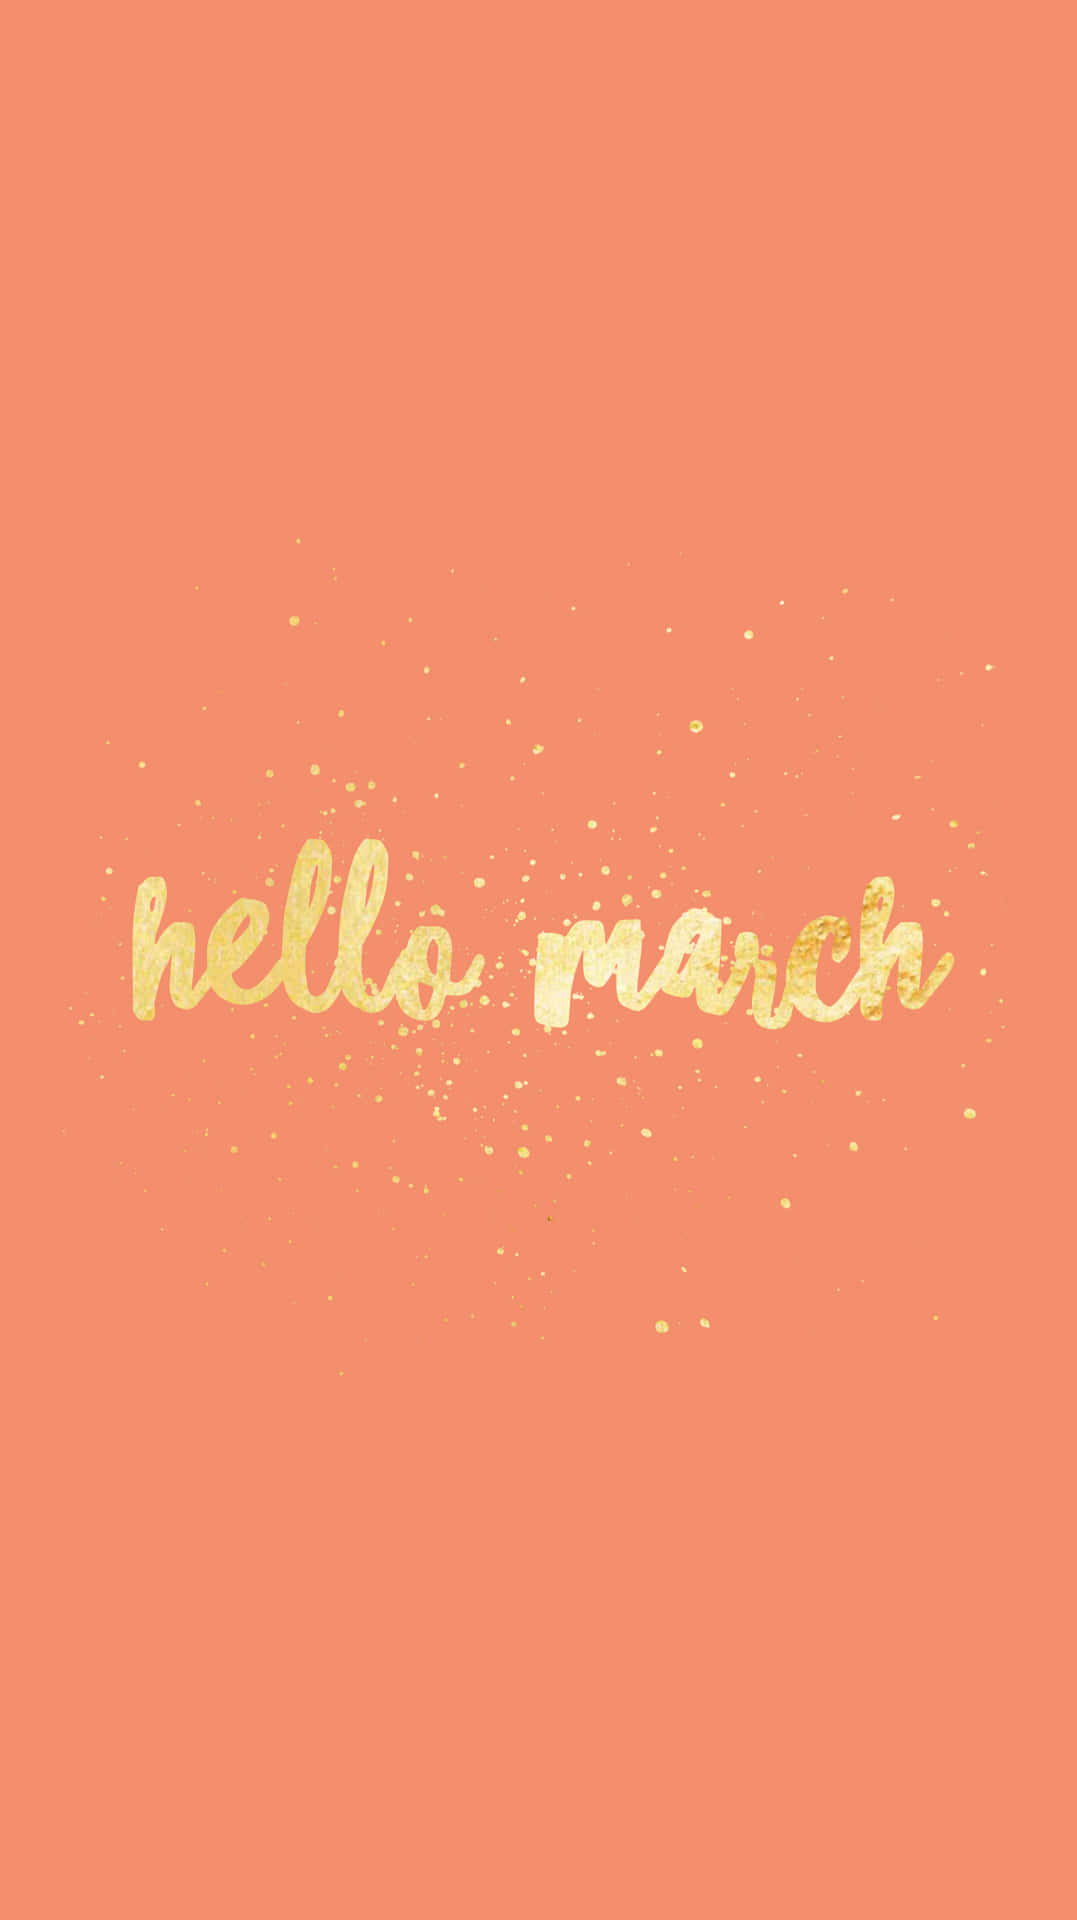 Welcome in March with a Cute Smiling Flower Wallpaper